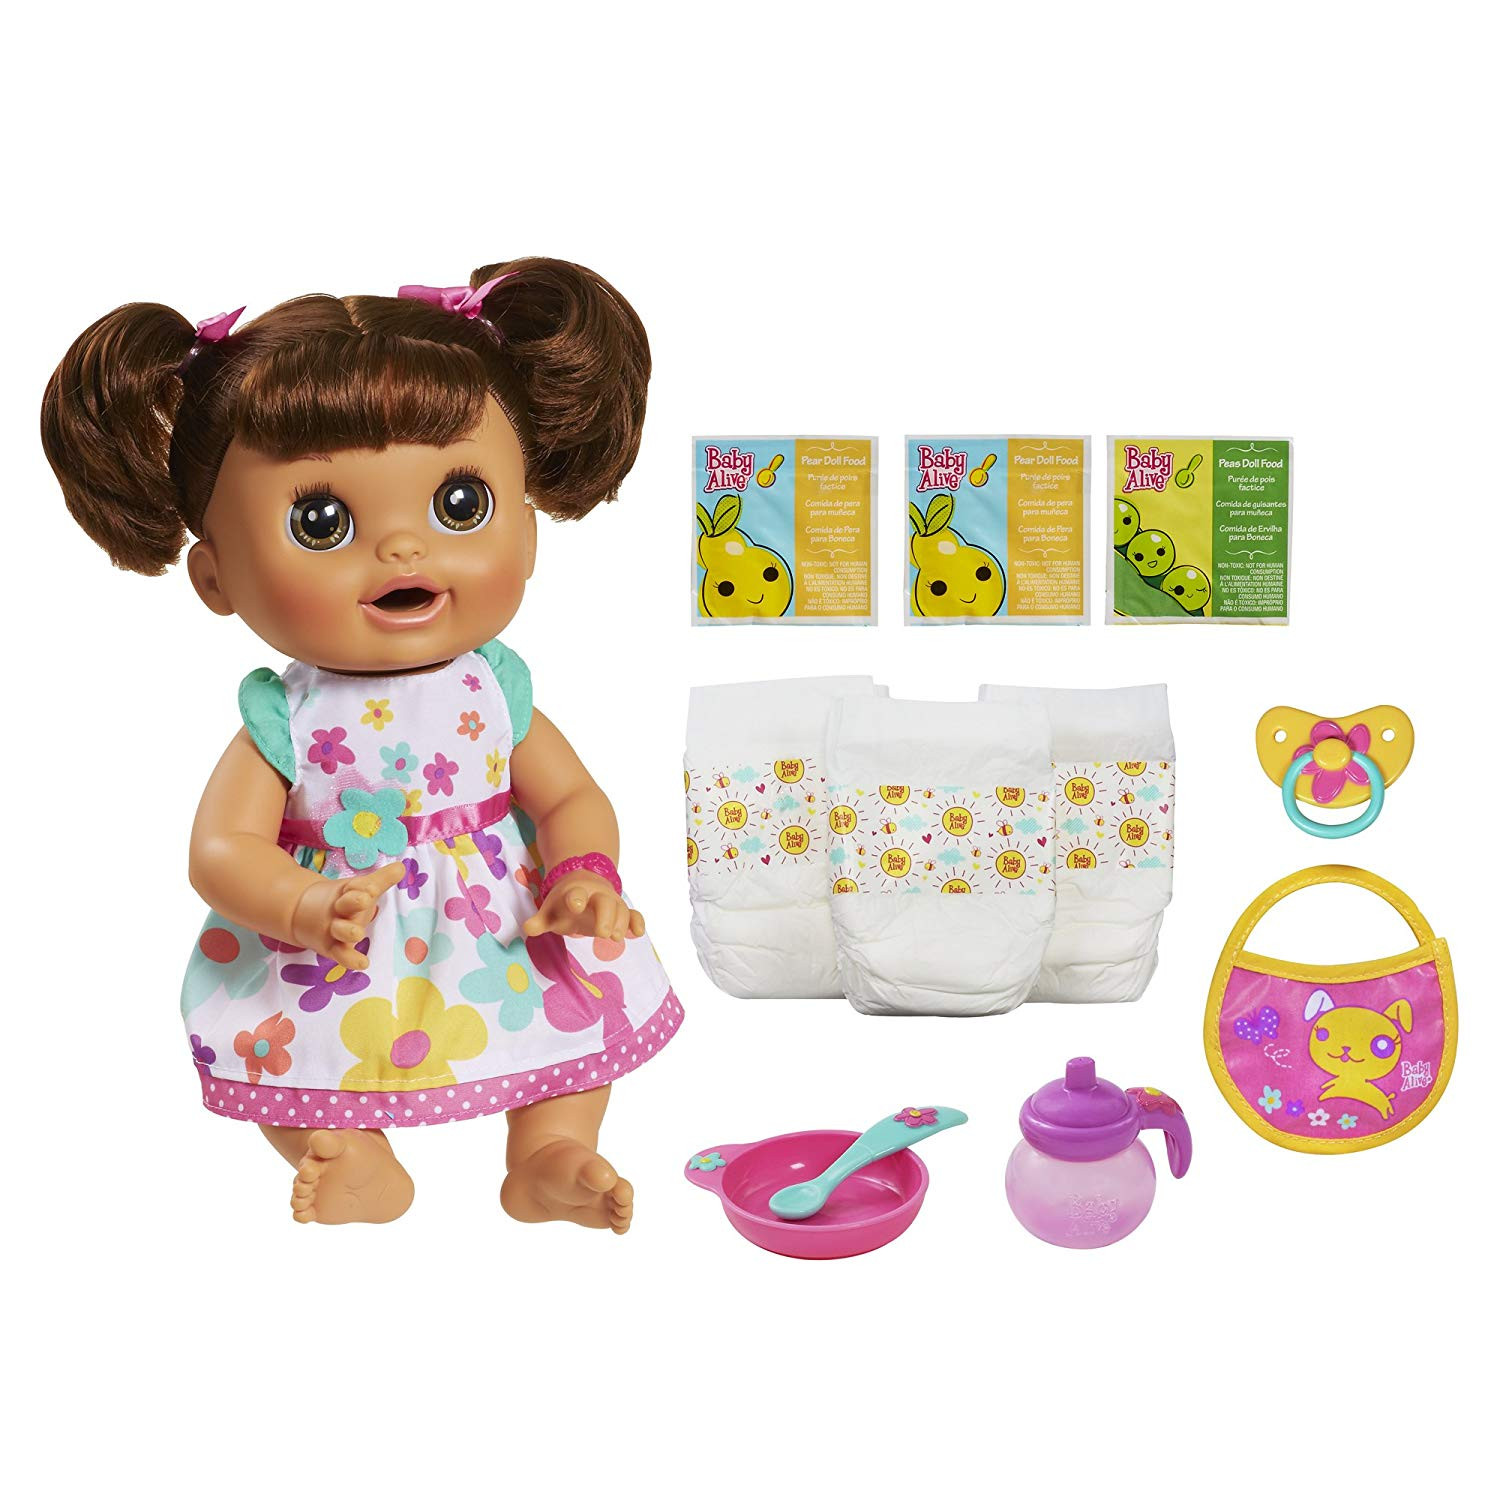 Baby Alive Doll Brown Hair
 Baby alive deals on 1001 Blocks